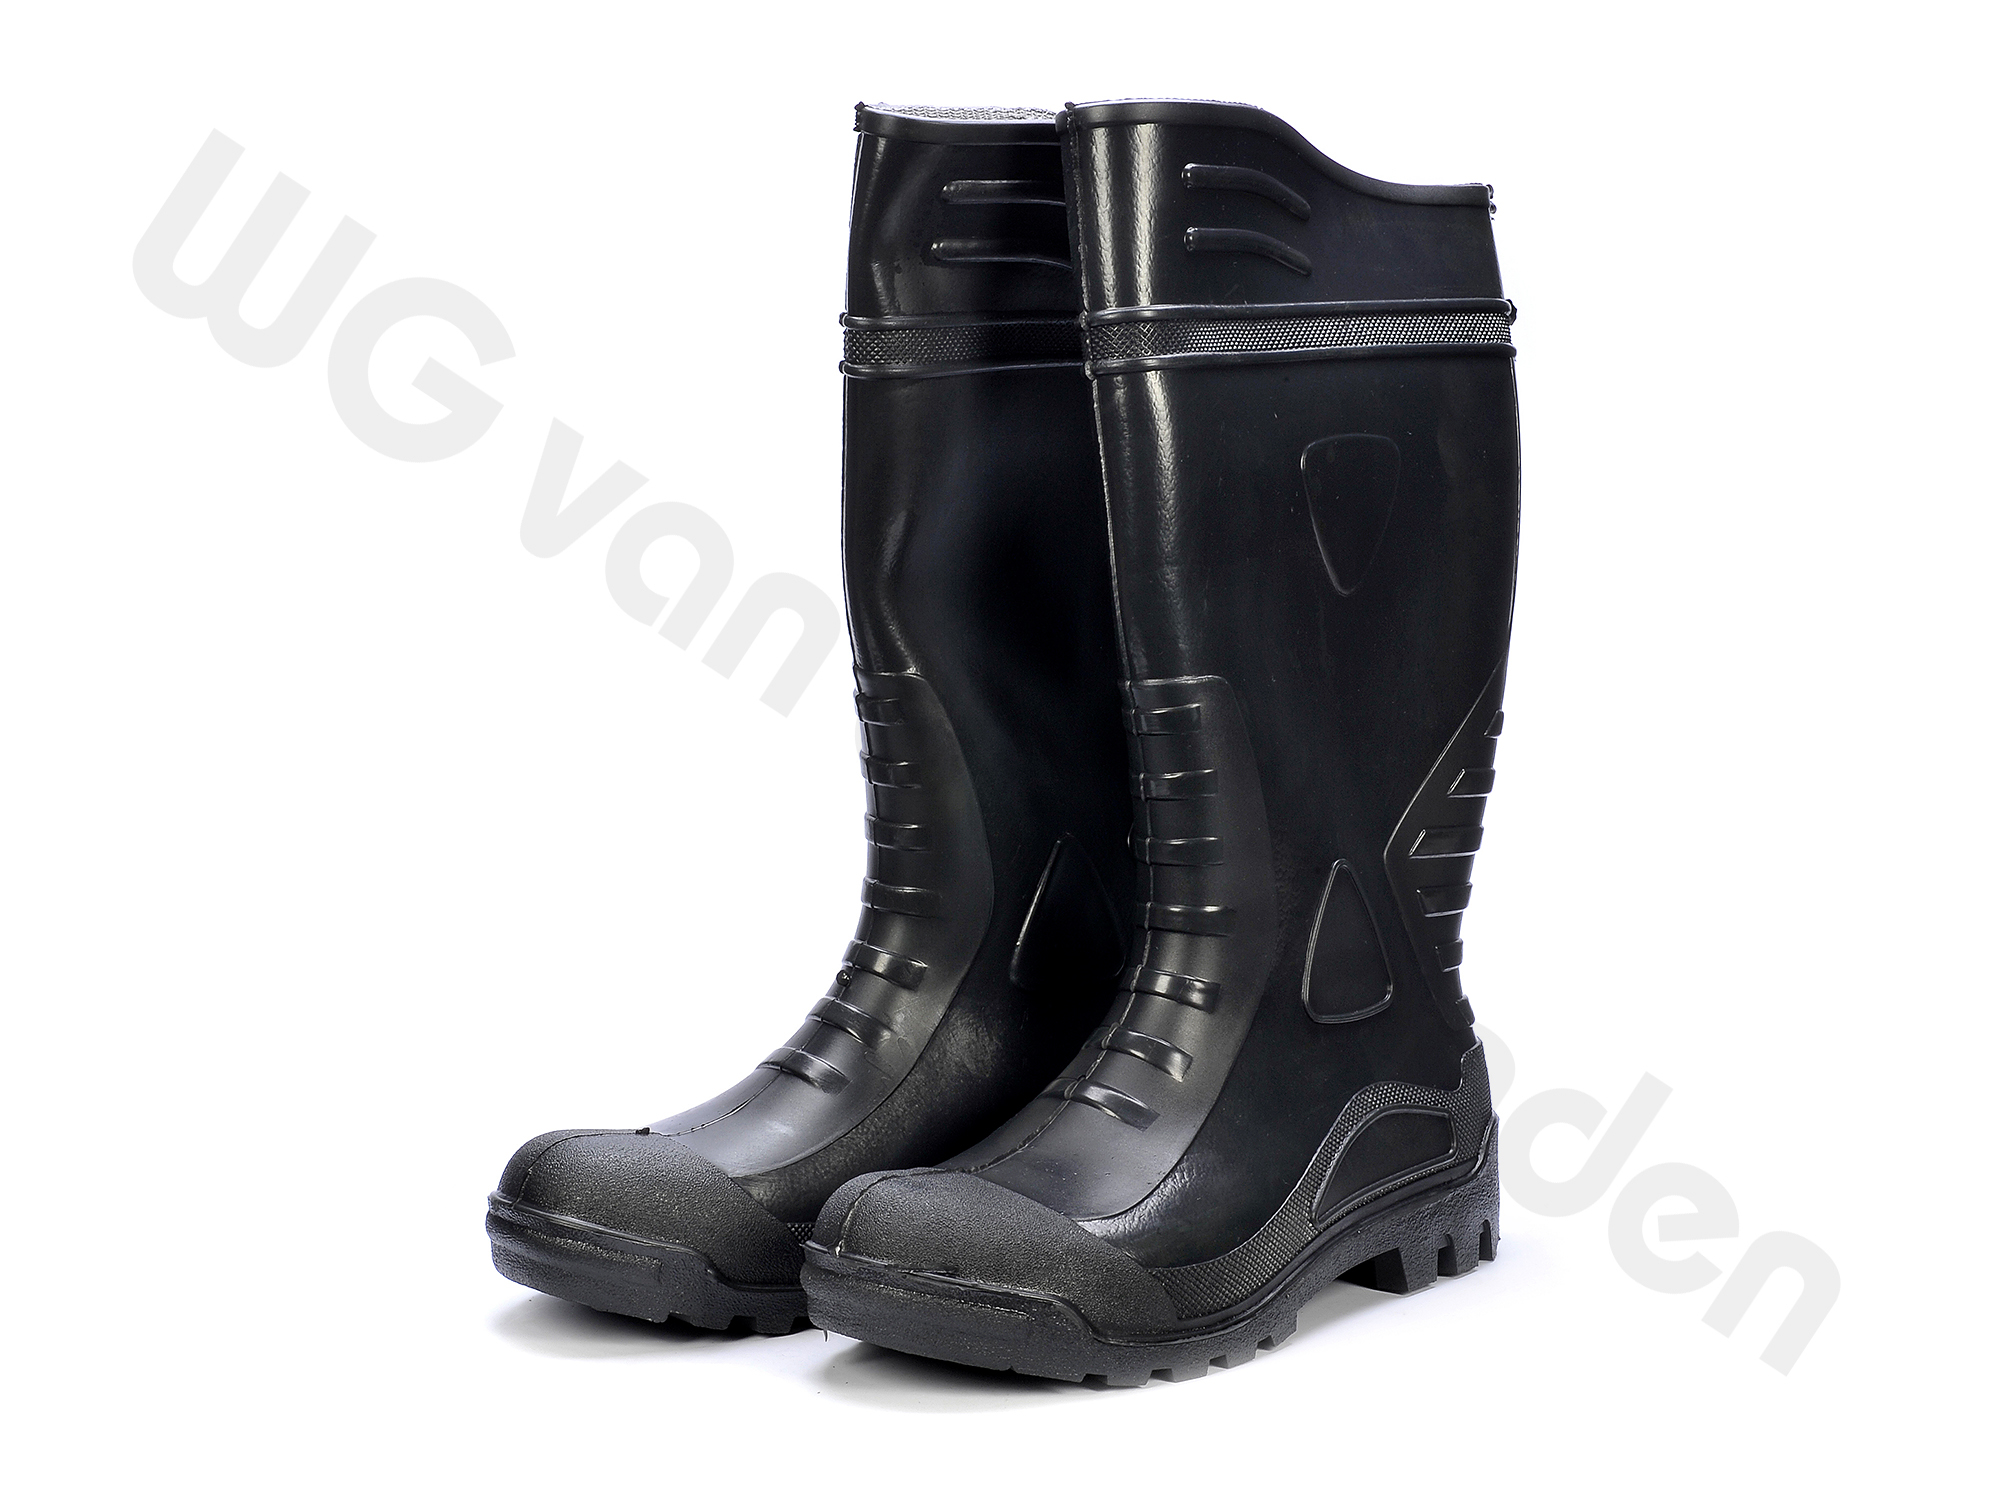 880209 BOOTS SAFETY S4 PVC WITH STEEL TOE SIZE 46/29CM CE